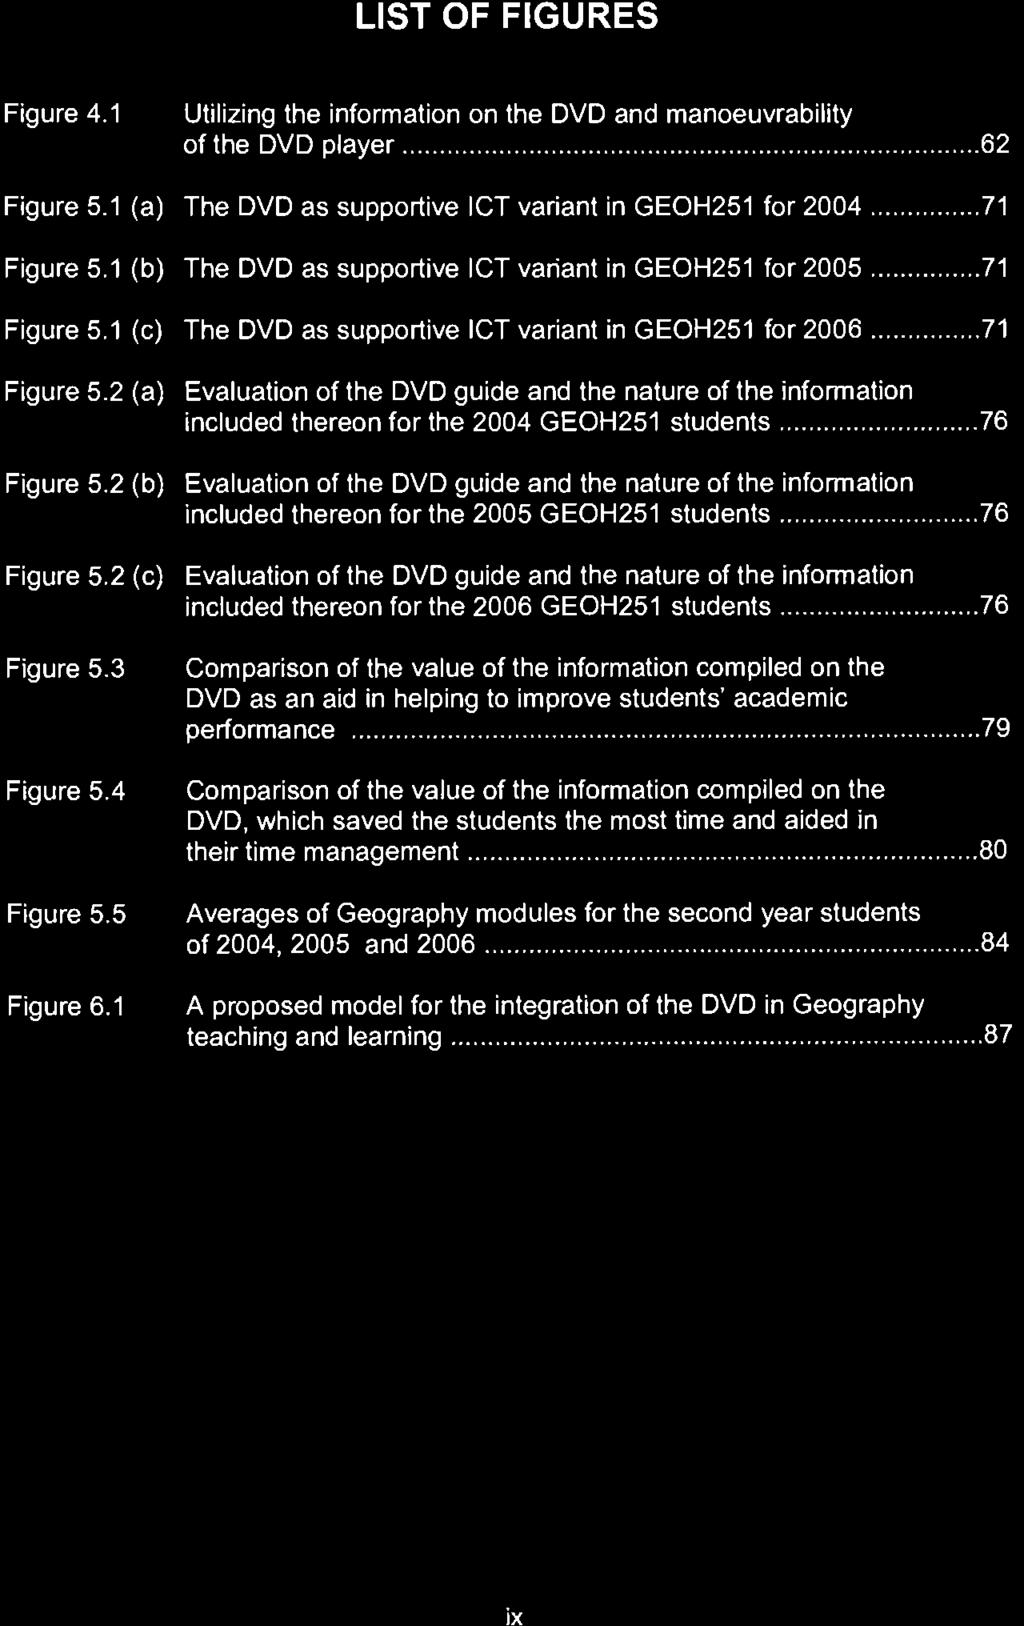 ....76 Figure 5.2 (b) Evaluation of the DVD guide and the nature of the information included thereon for the 2005 GEOH251 students... 76 Figure 5.